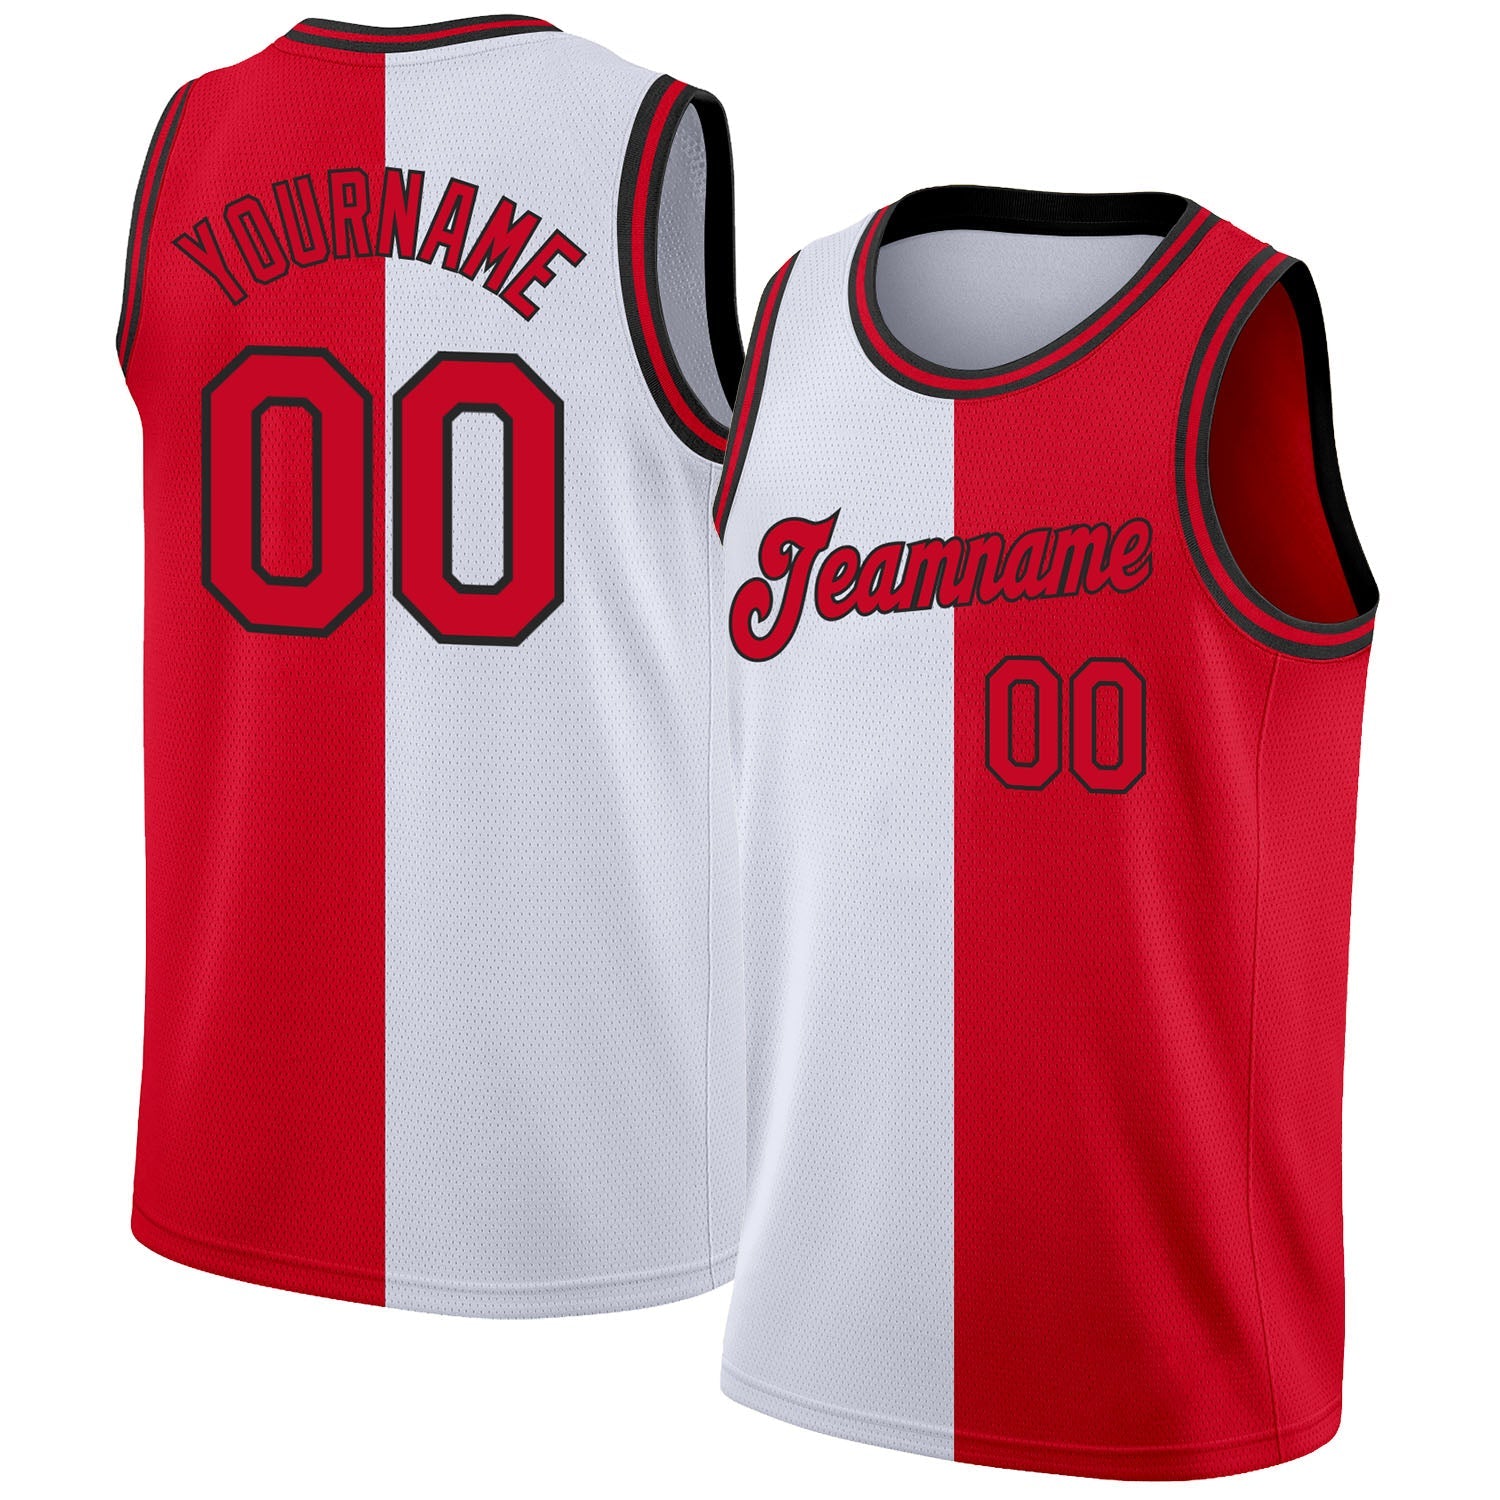  Basketball Uniform Costum Cool Basketball Outfit for